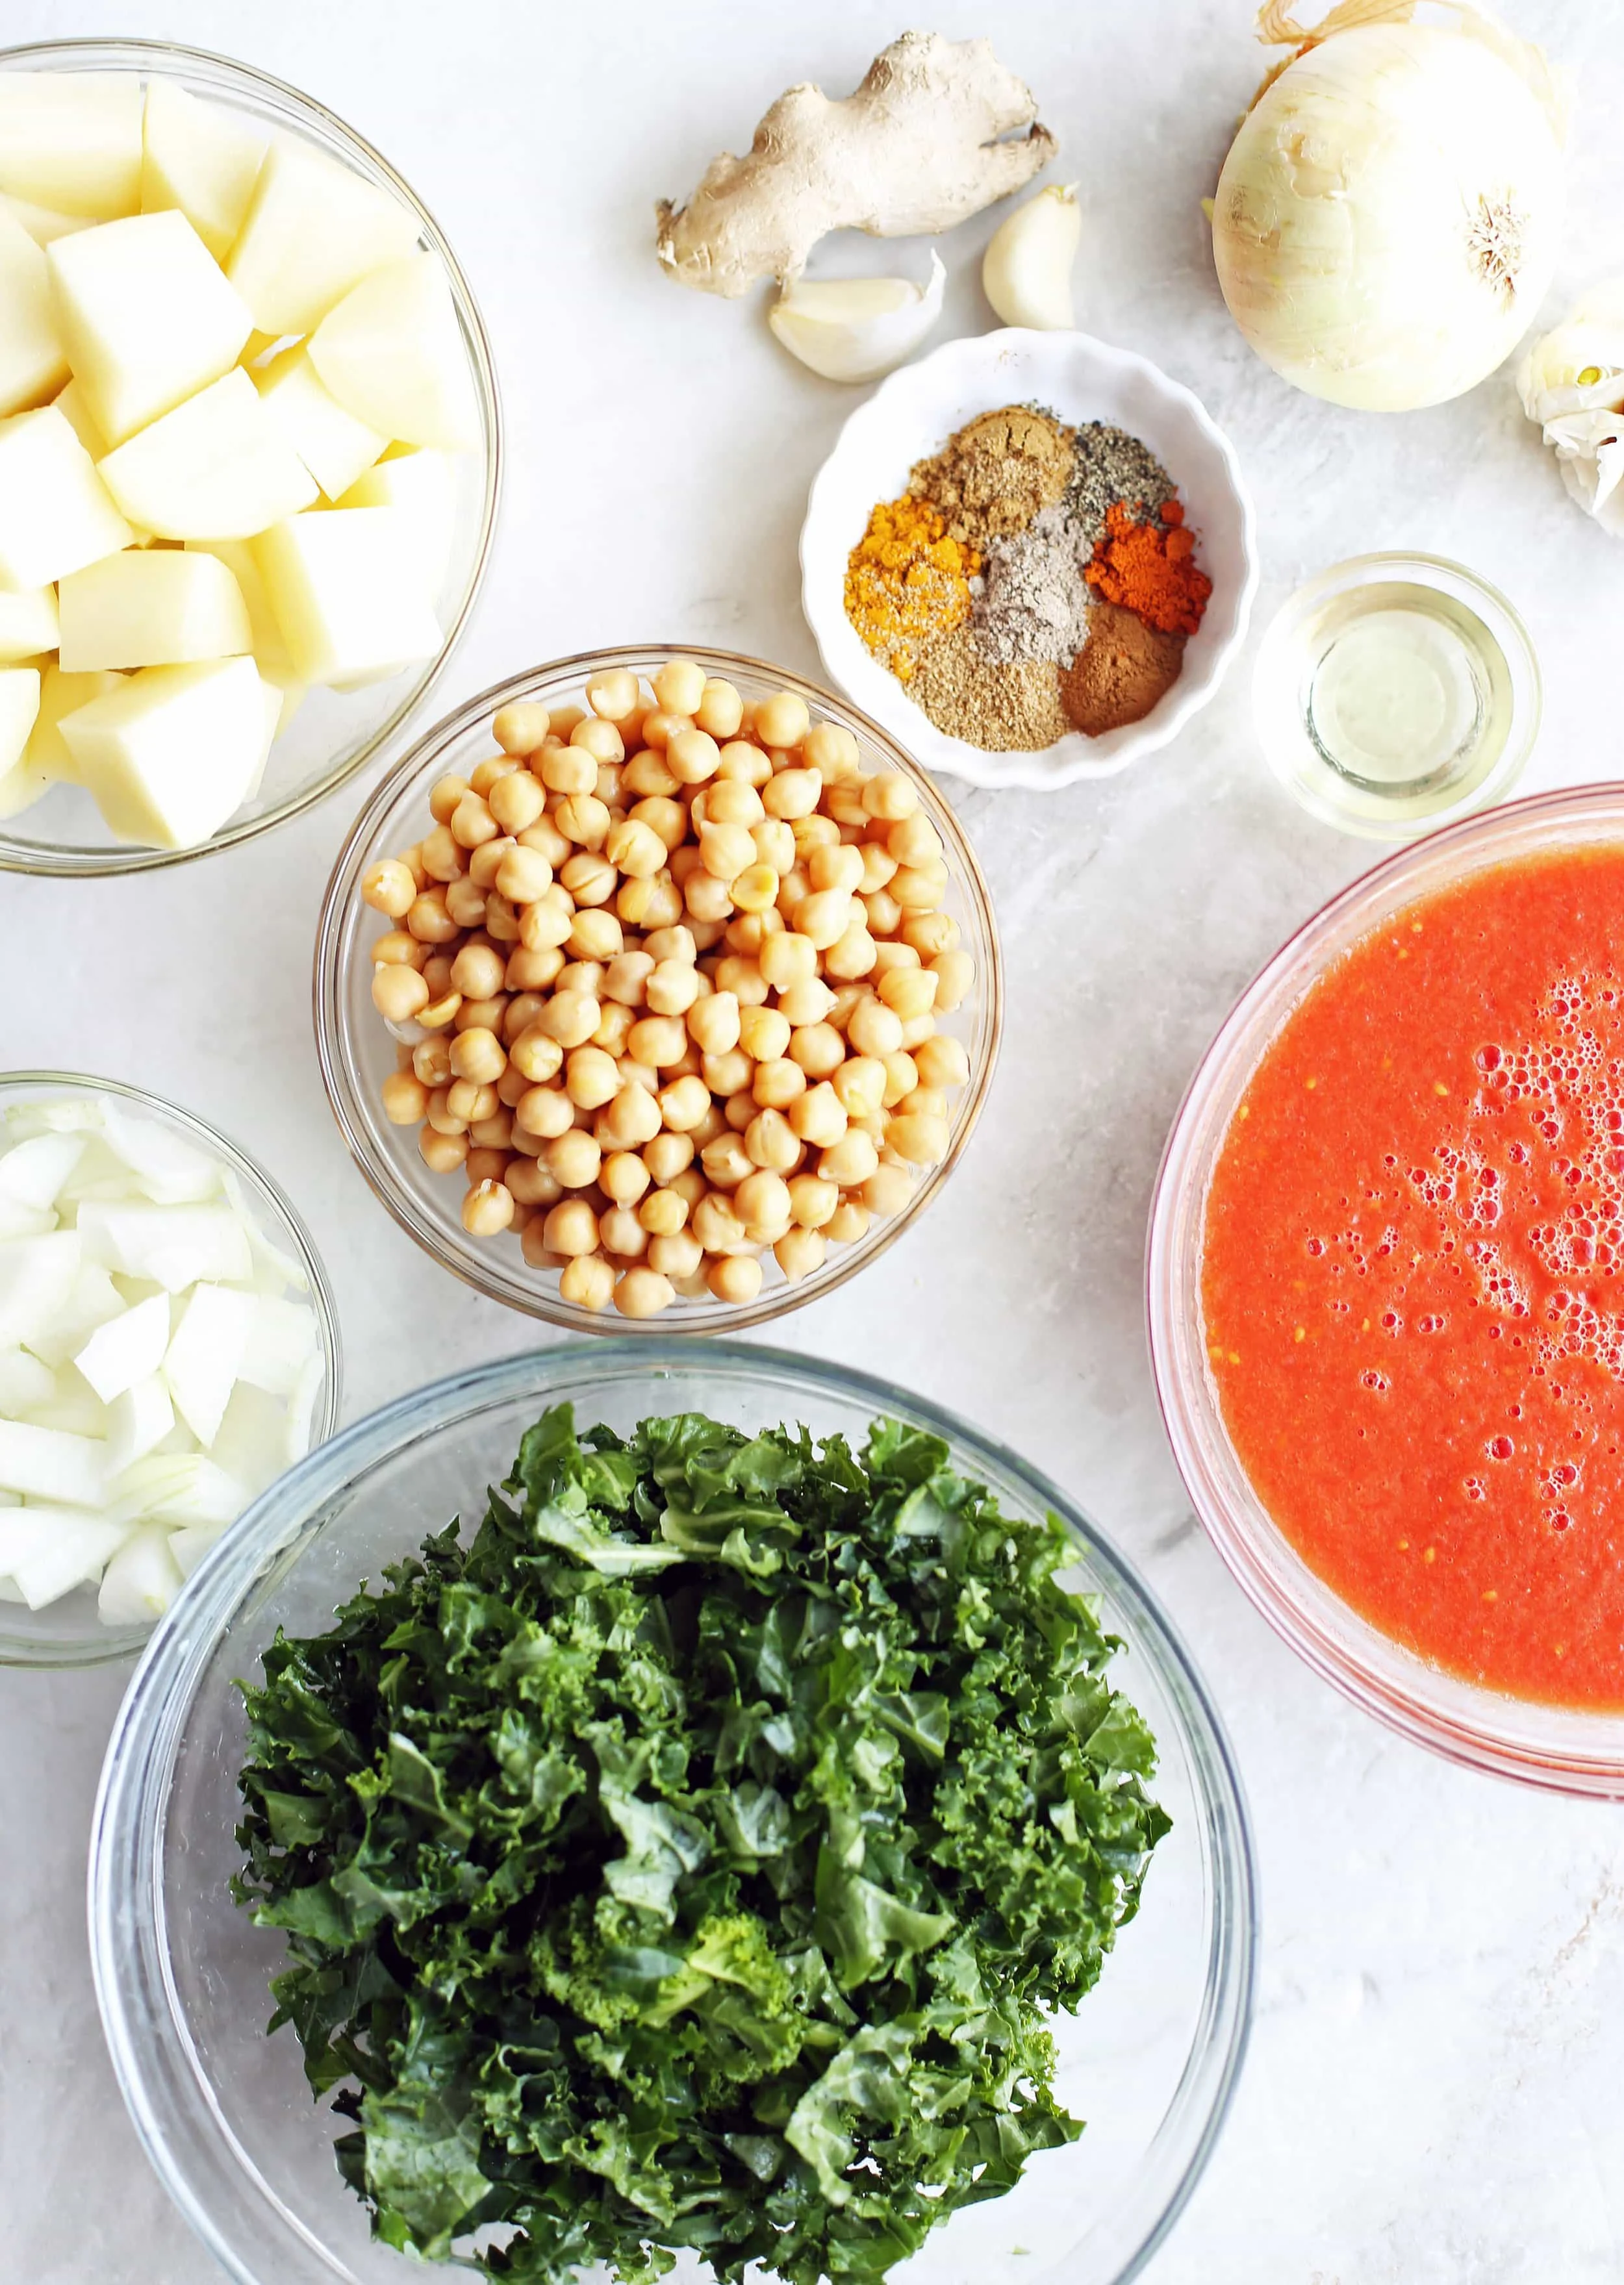 Bowls of kale, chickpeas, potatoes,onions, pureed tomatoes, spices, garlic, and onion.